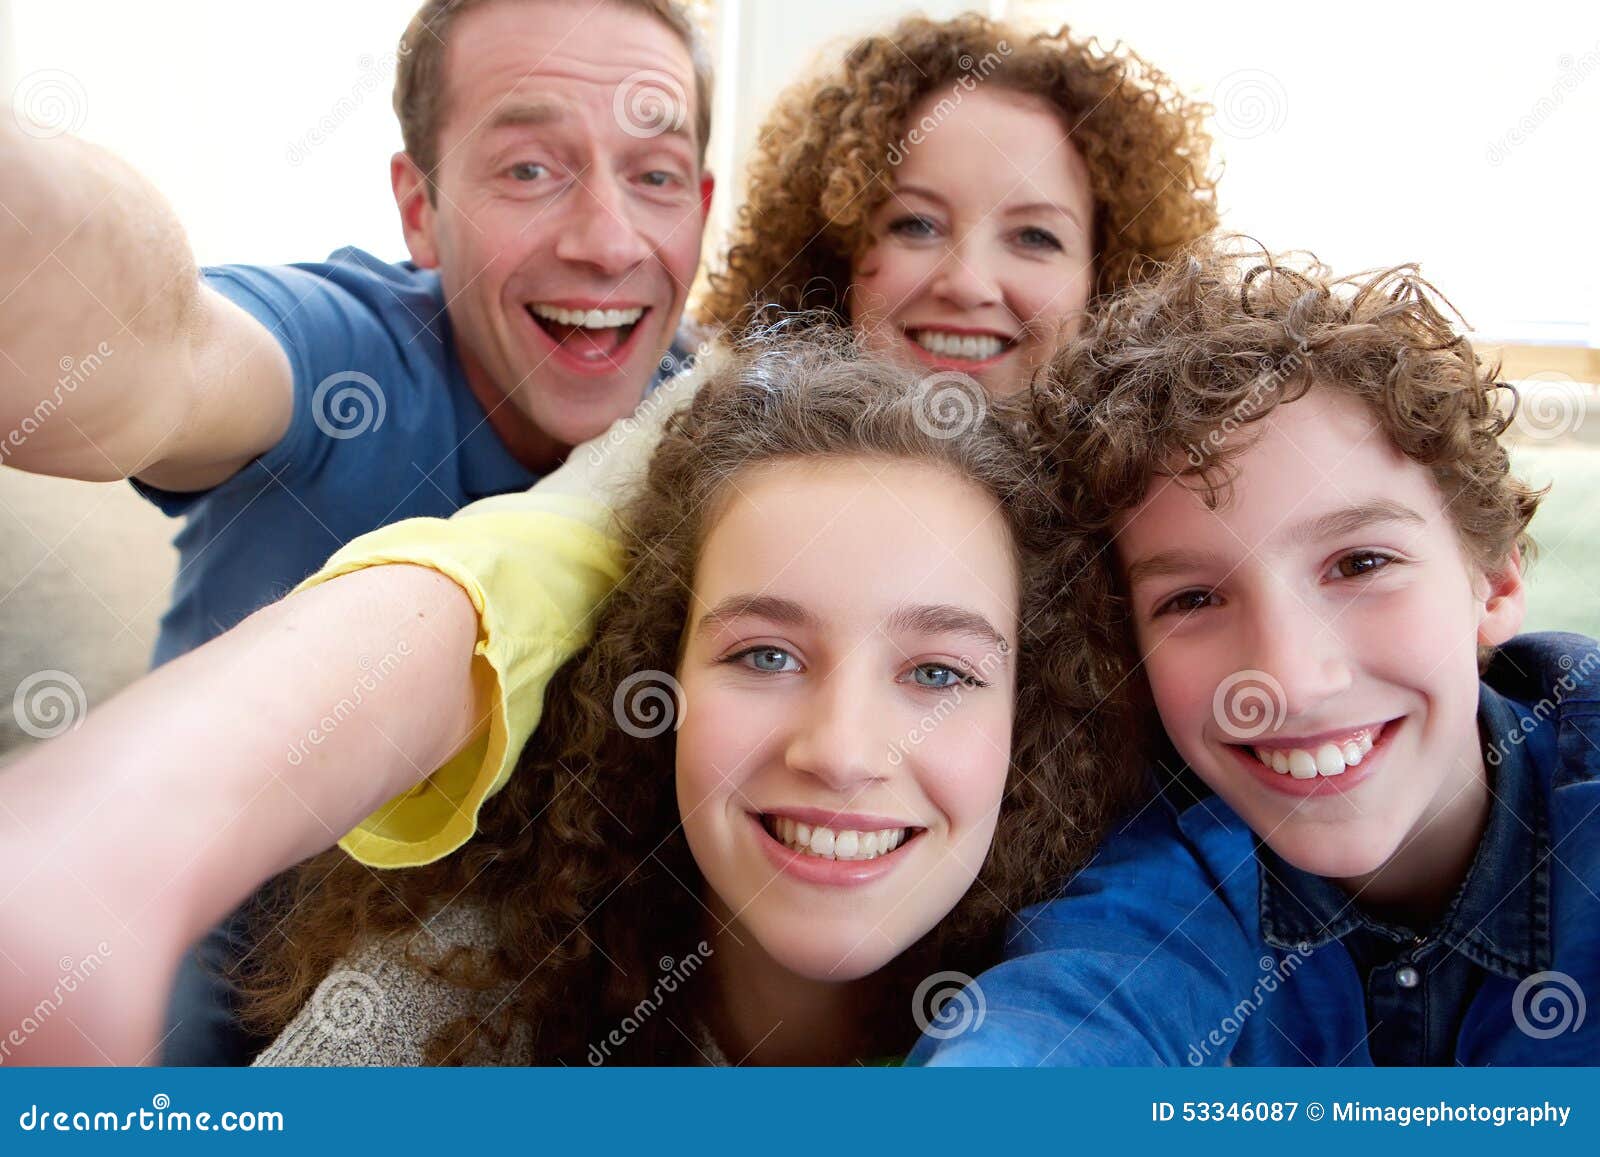 Happy Family Taking a Selfie Together Stock Image - Image of face